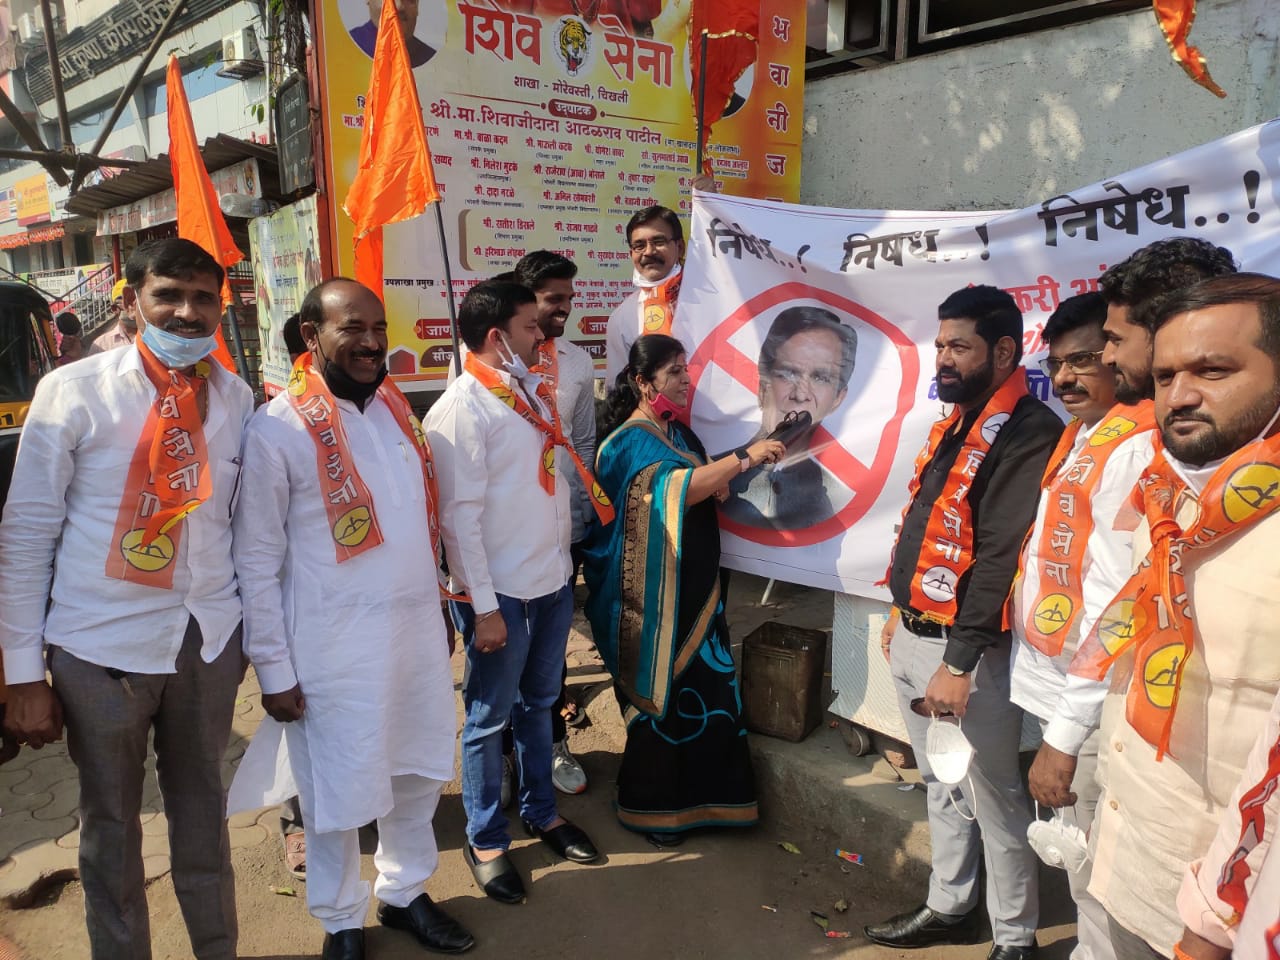 Protest by slapping the image of Minister Raosaheb Danve in the case of absurd statement